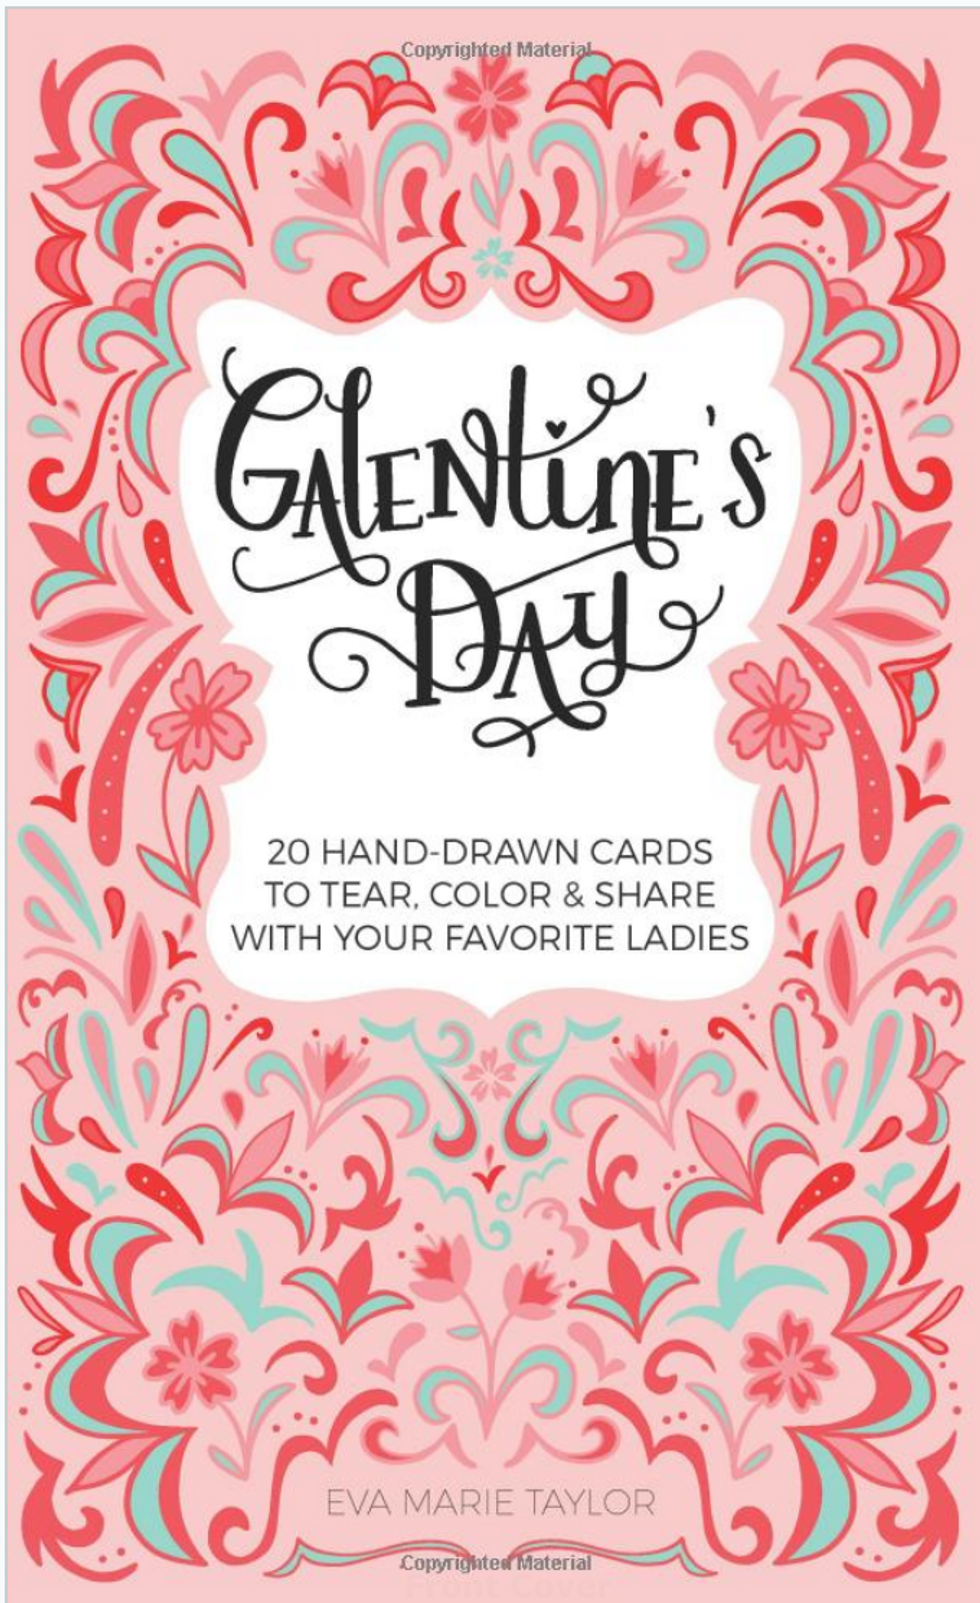 Buy Galentine's Day: 20 Hand-Drawn Cards to Tear, Color and Share with Your Favorite Ladies on Amazon